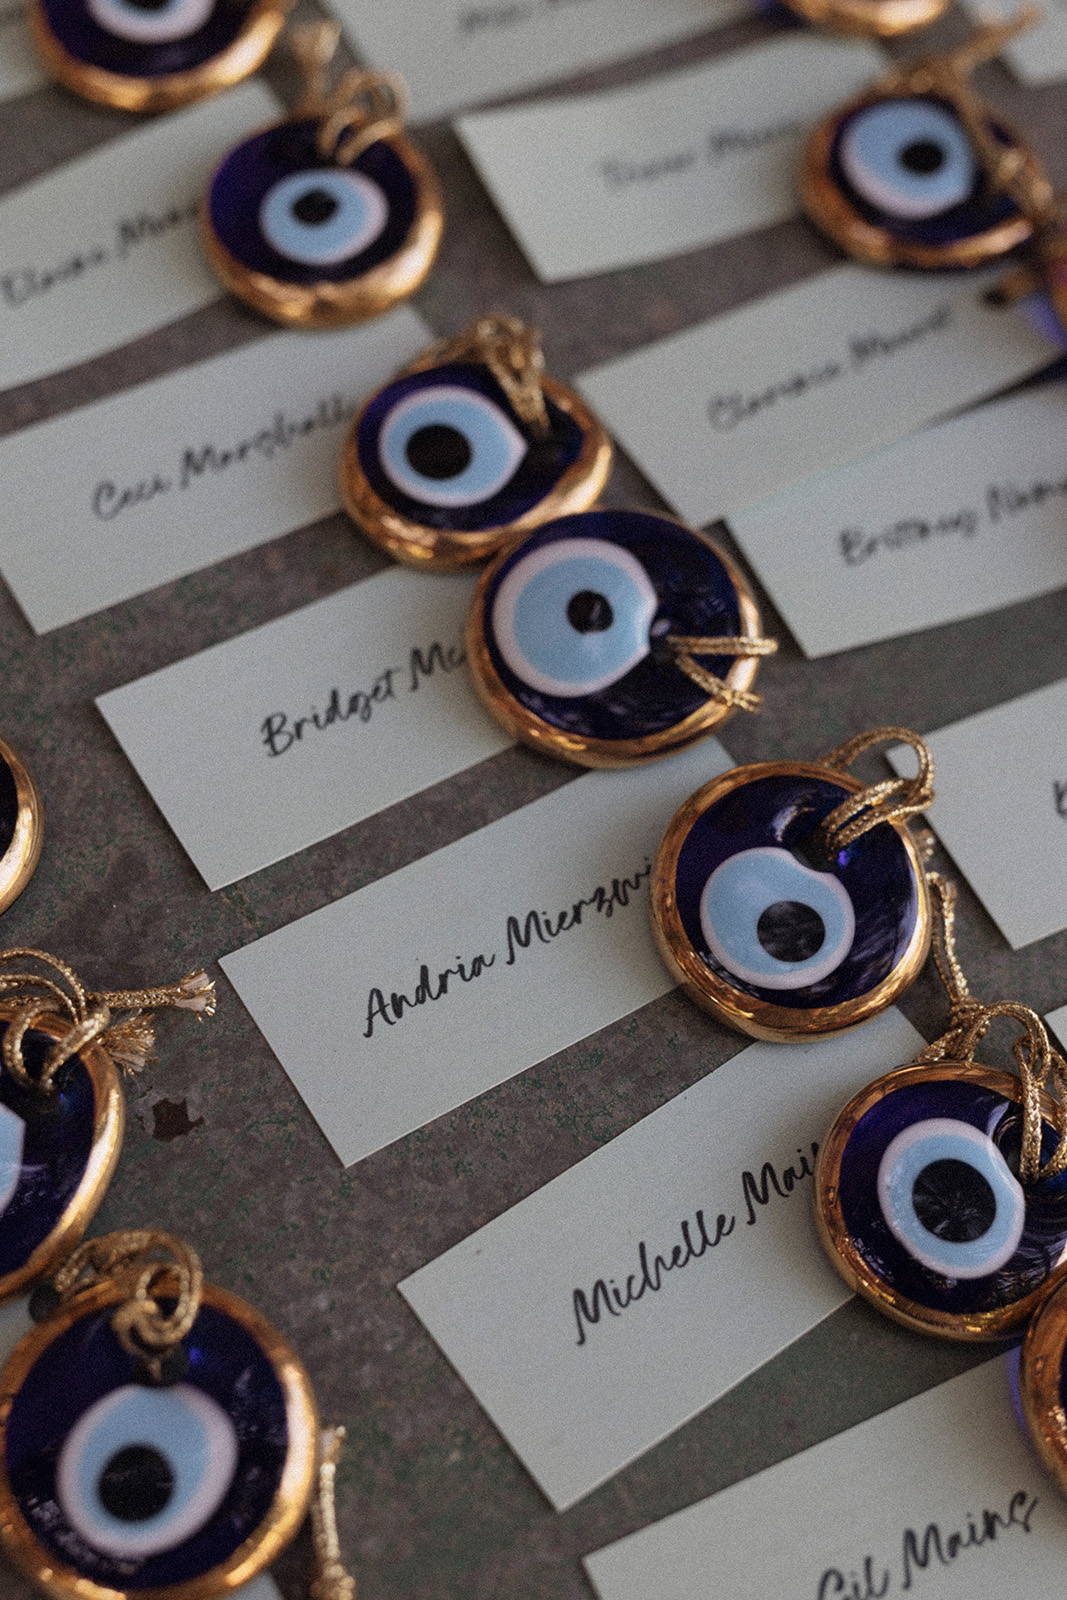 Greek eyes and name cards